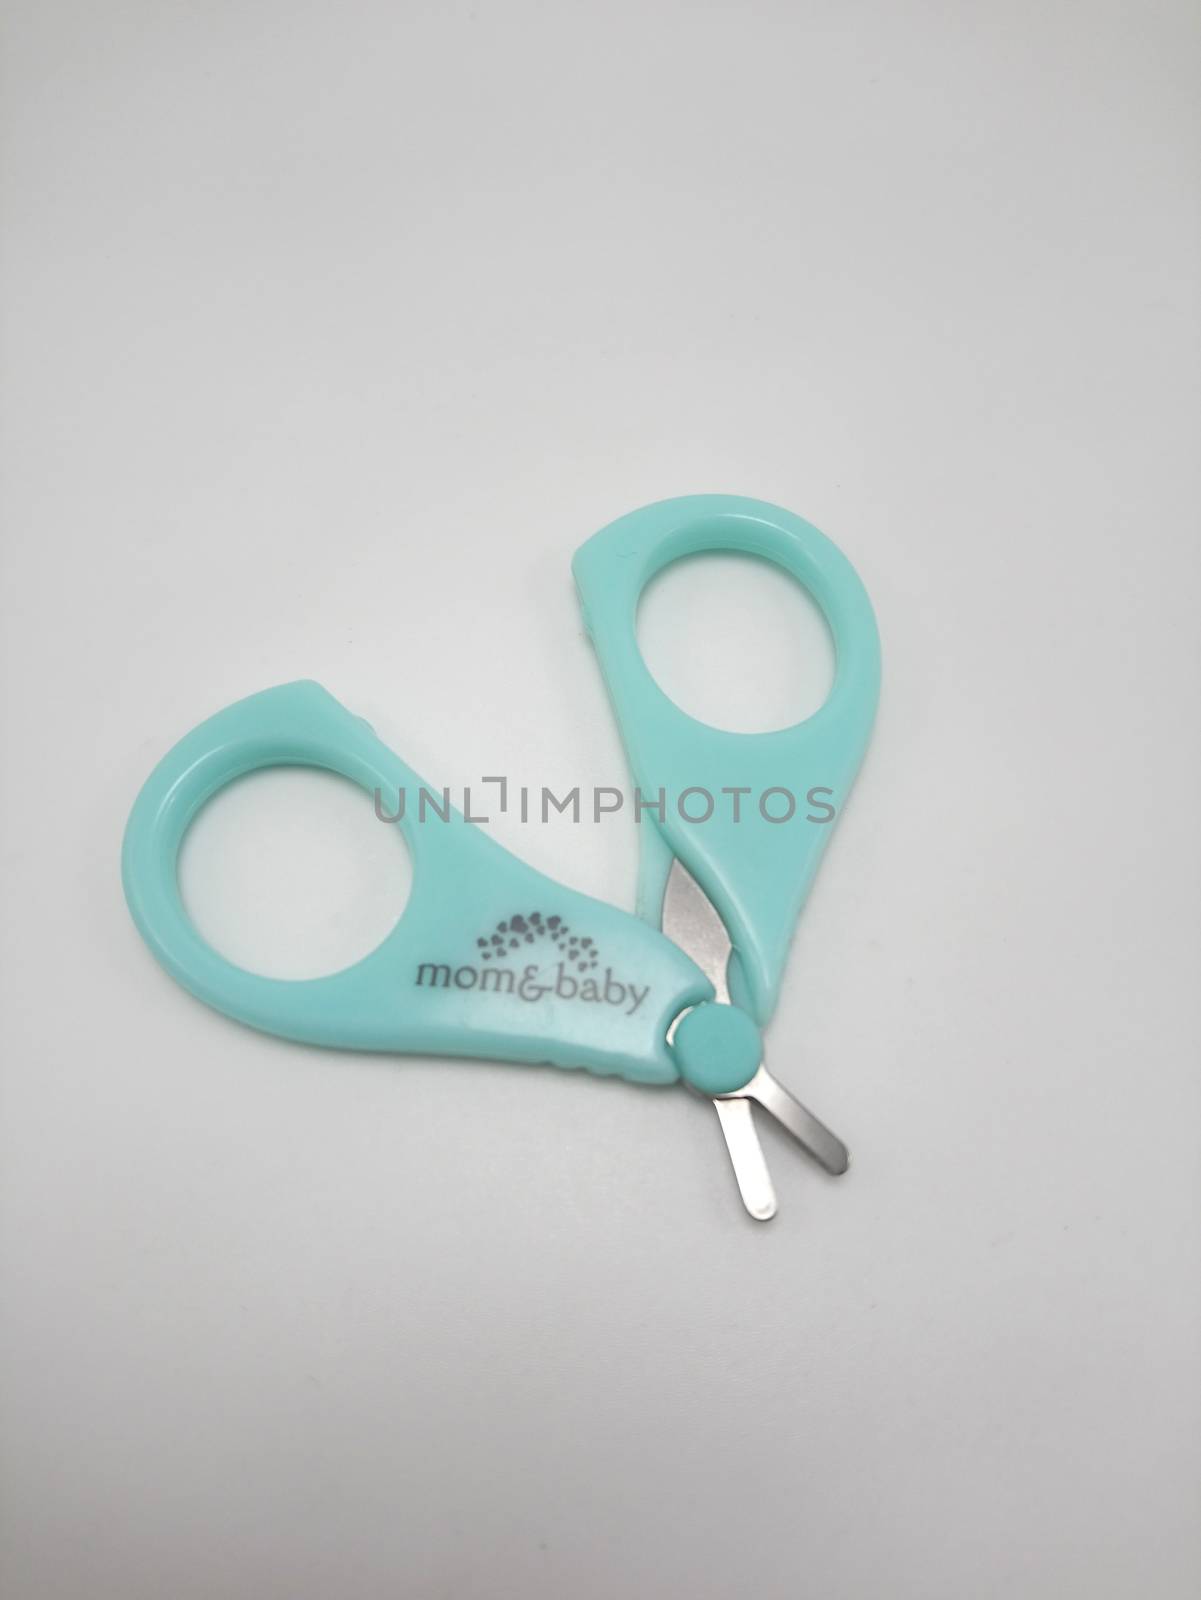 Mom and baby nail scissors in Manila, Philippines by imwaltersy